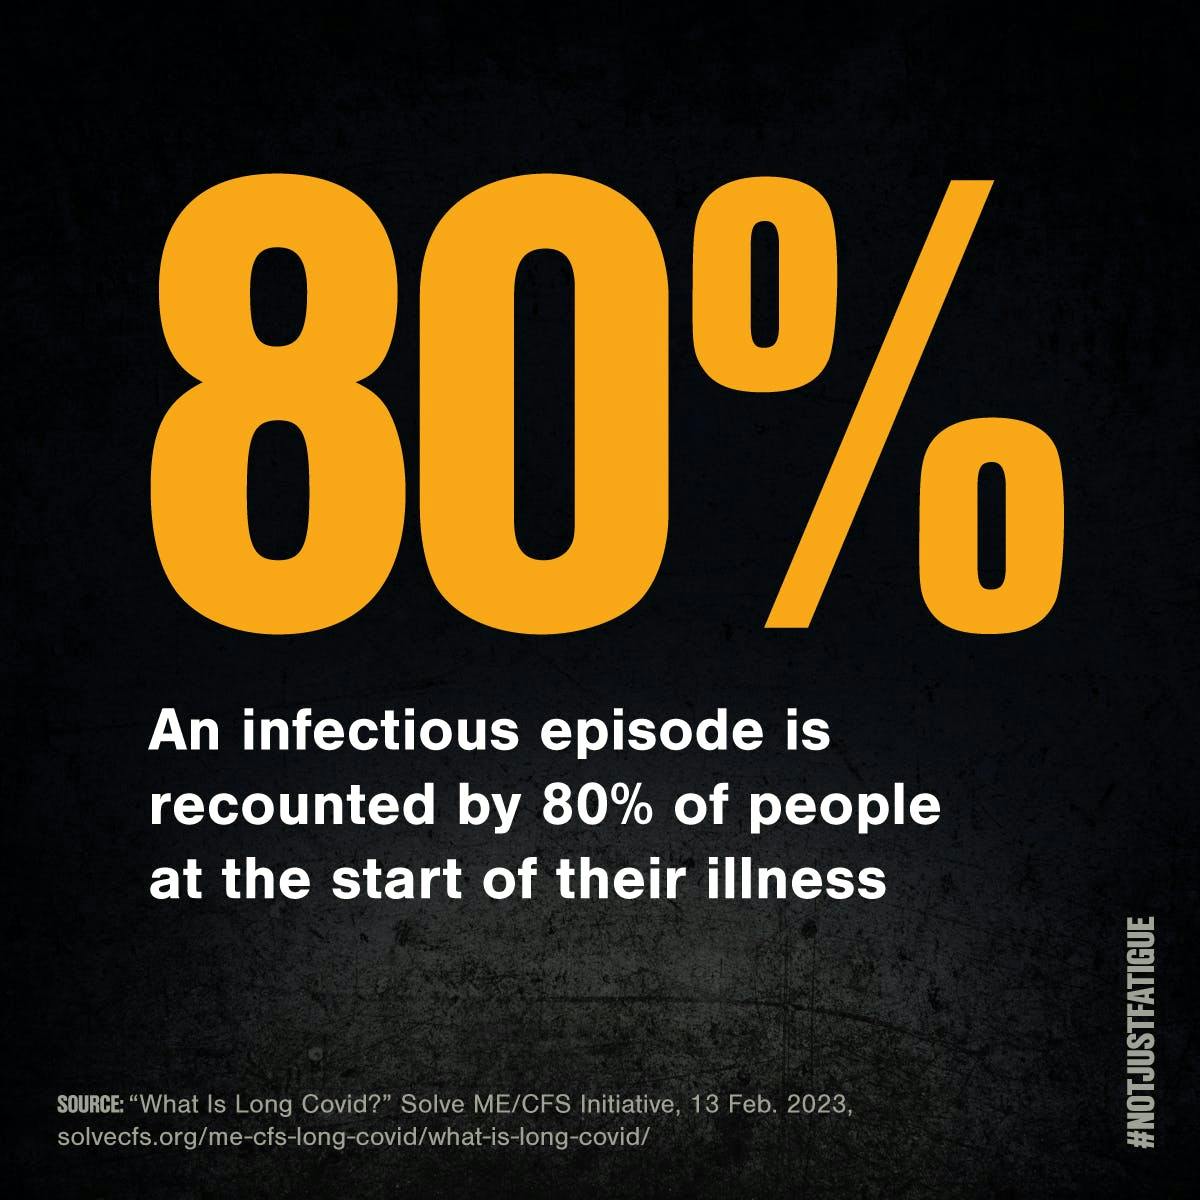 An infectious episode is recounted by 80% of people at the start of their illness.